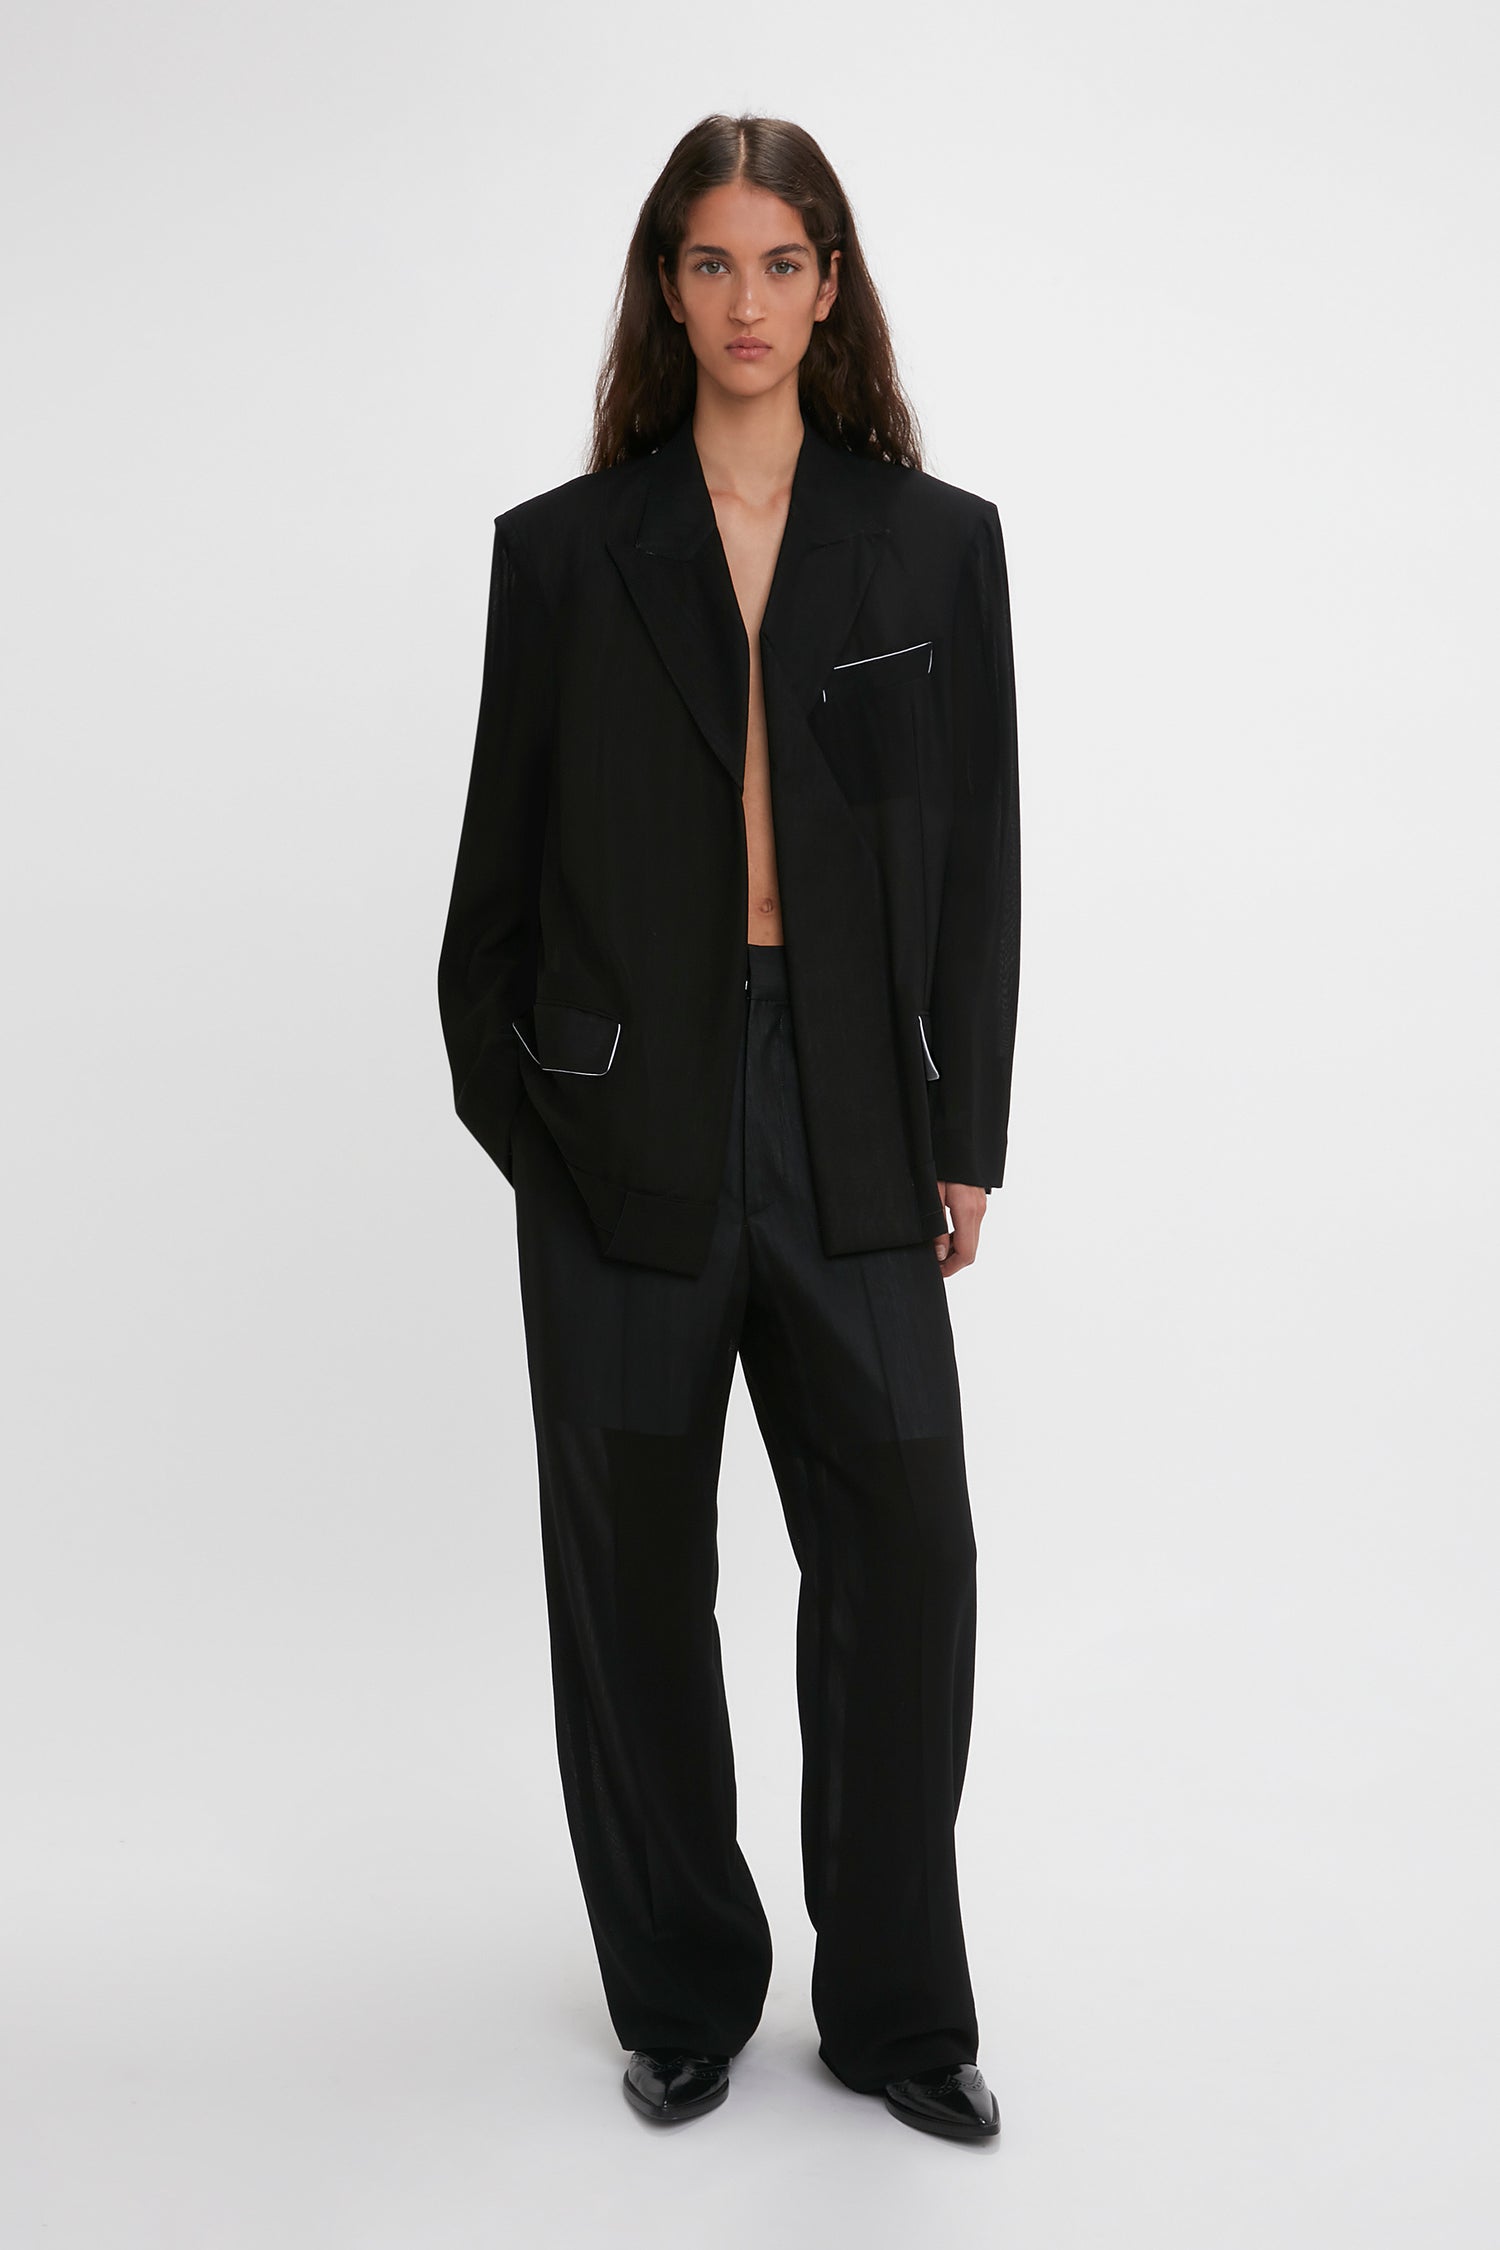 A woman models a Victoria Beckham black suit featuring a Fold Detail Tailored Jacket and straight leg trousers with waistband detail, standing against a plain white background.